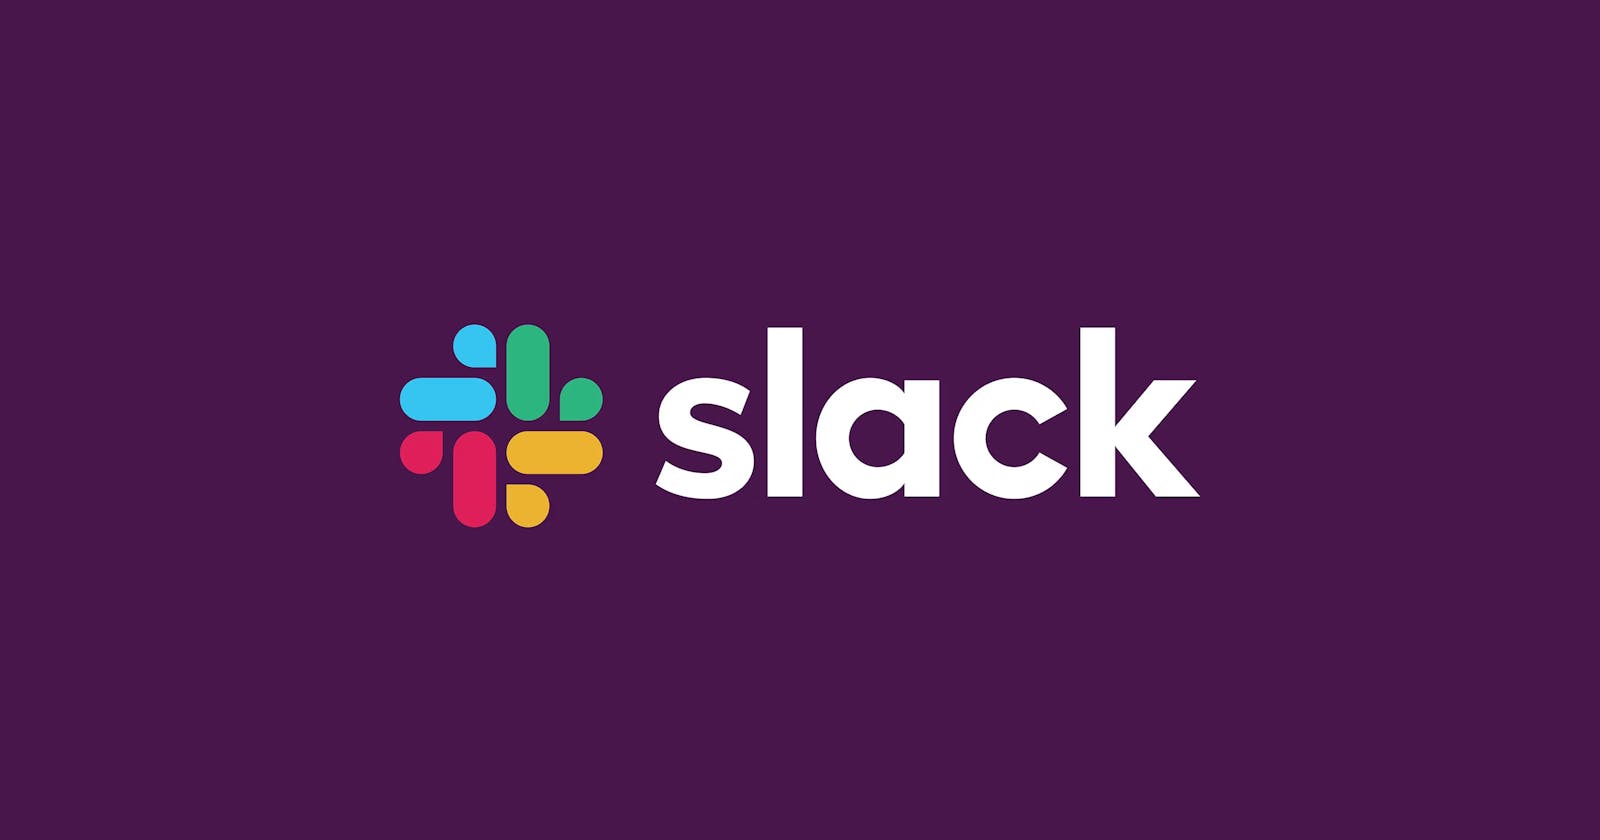 Release Notes For Slack 4.31.150 (Windows), 4.33.73 (Mac), 23.09.30 (iOS), And 23.09.40  (Android)